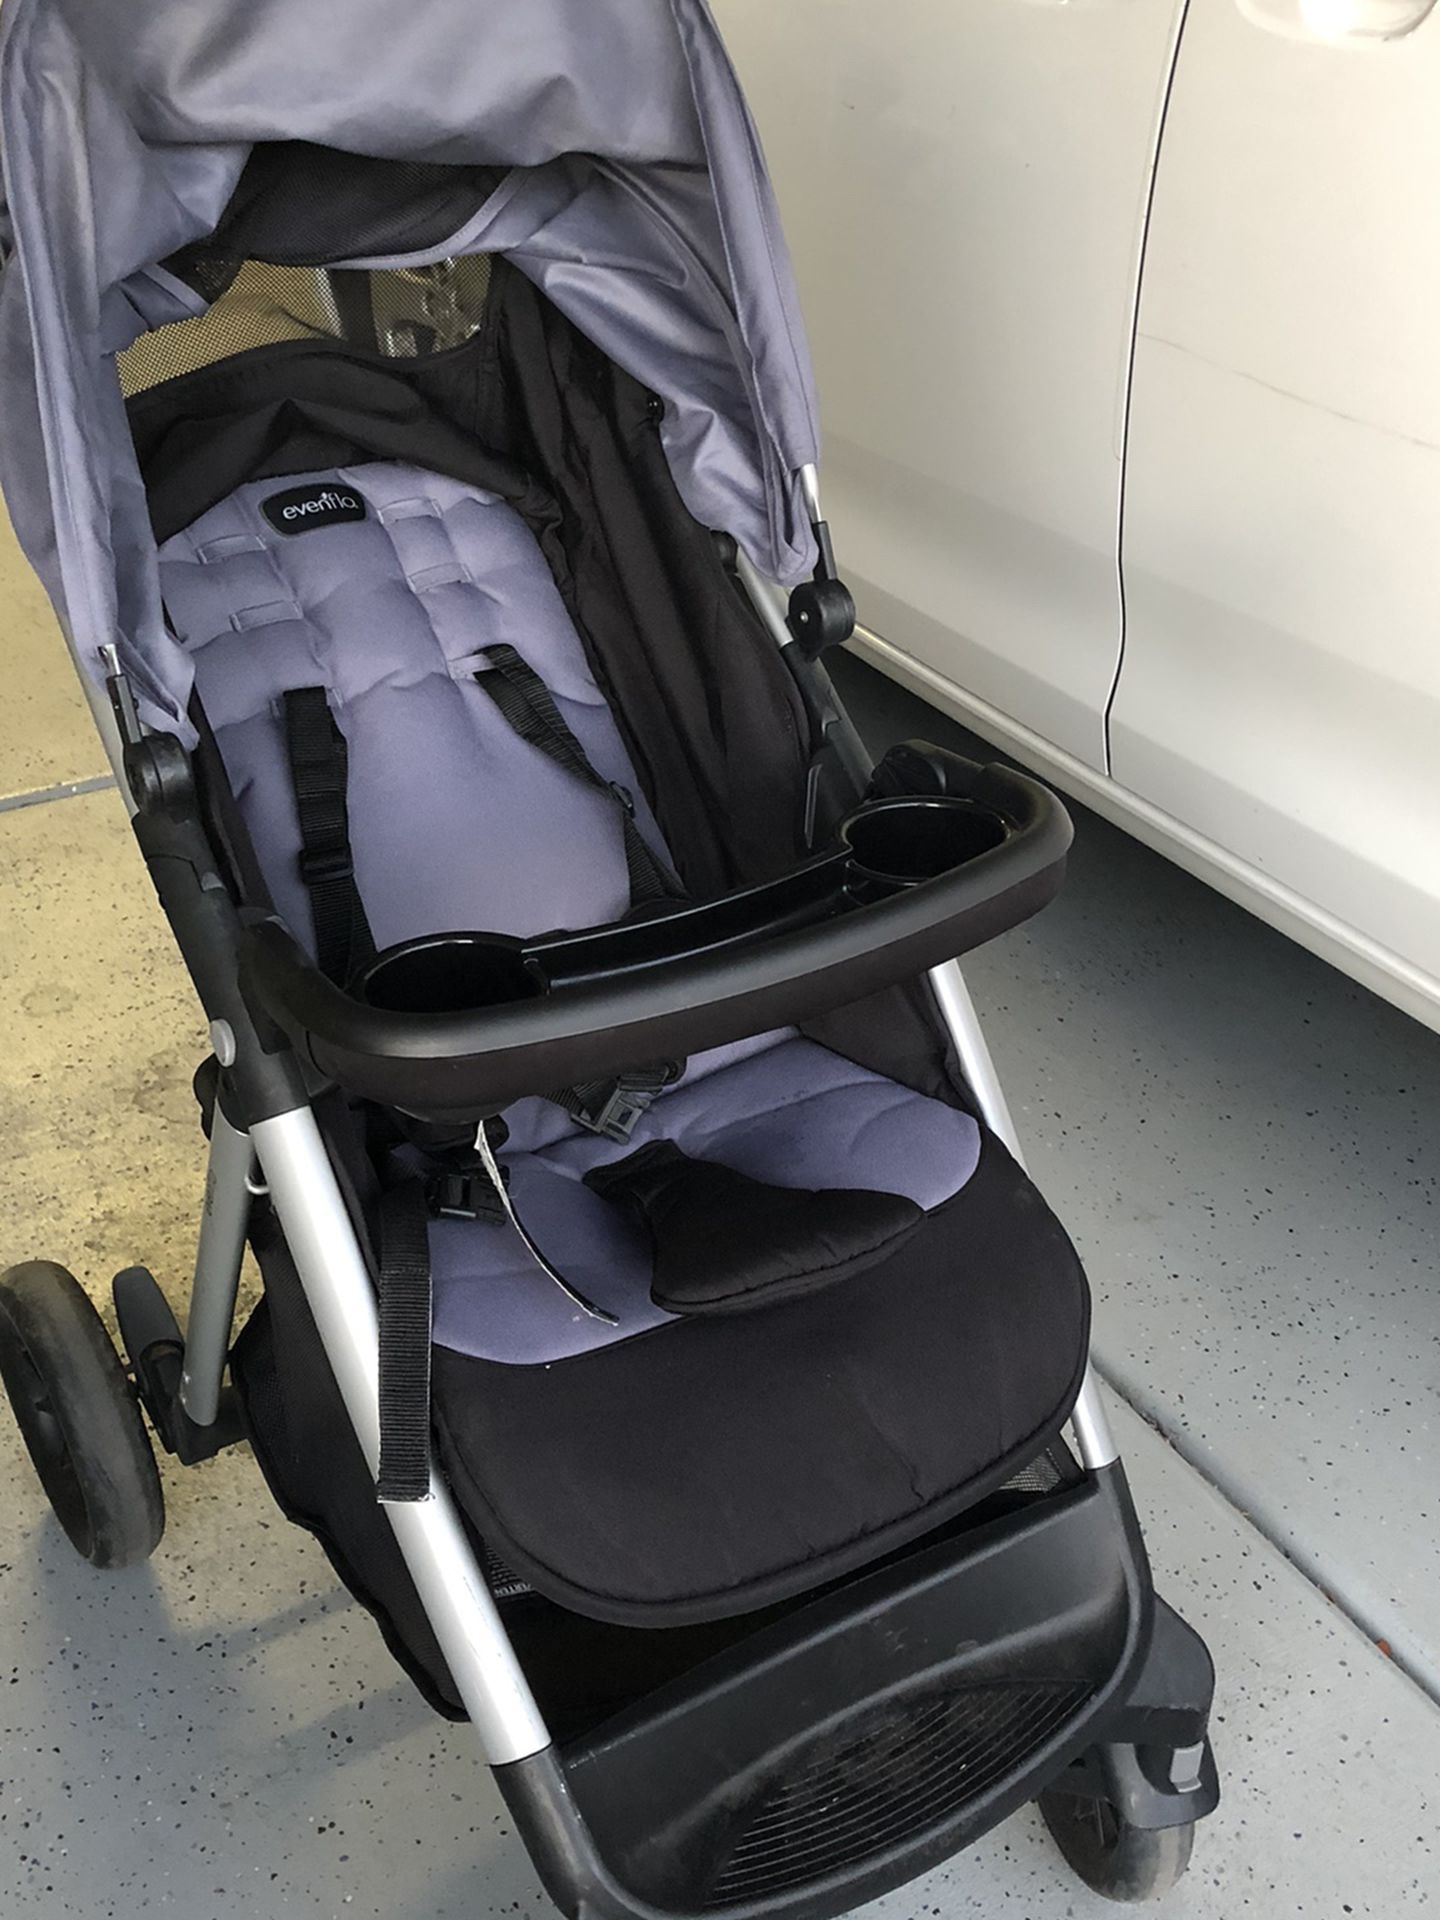 Evenflo car seat and stroller